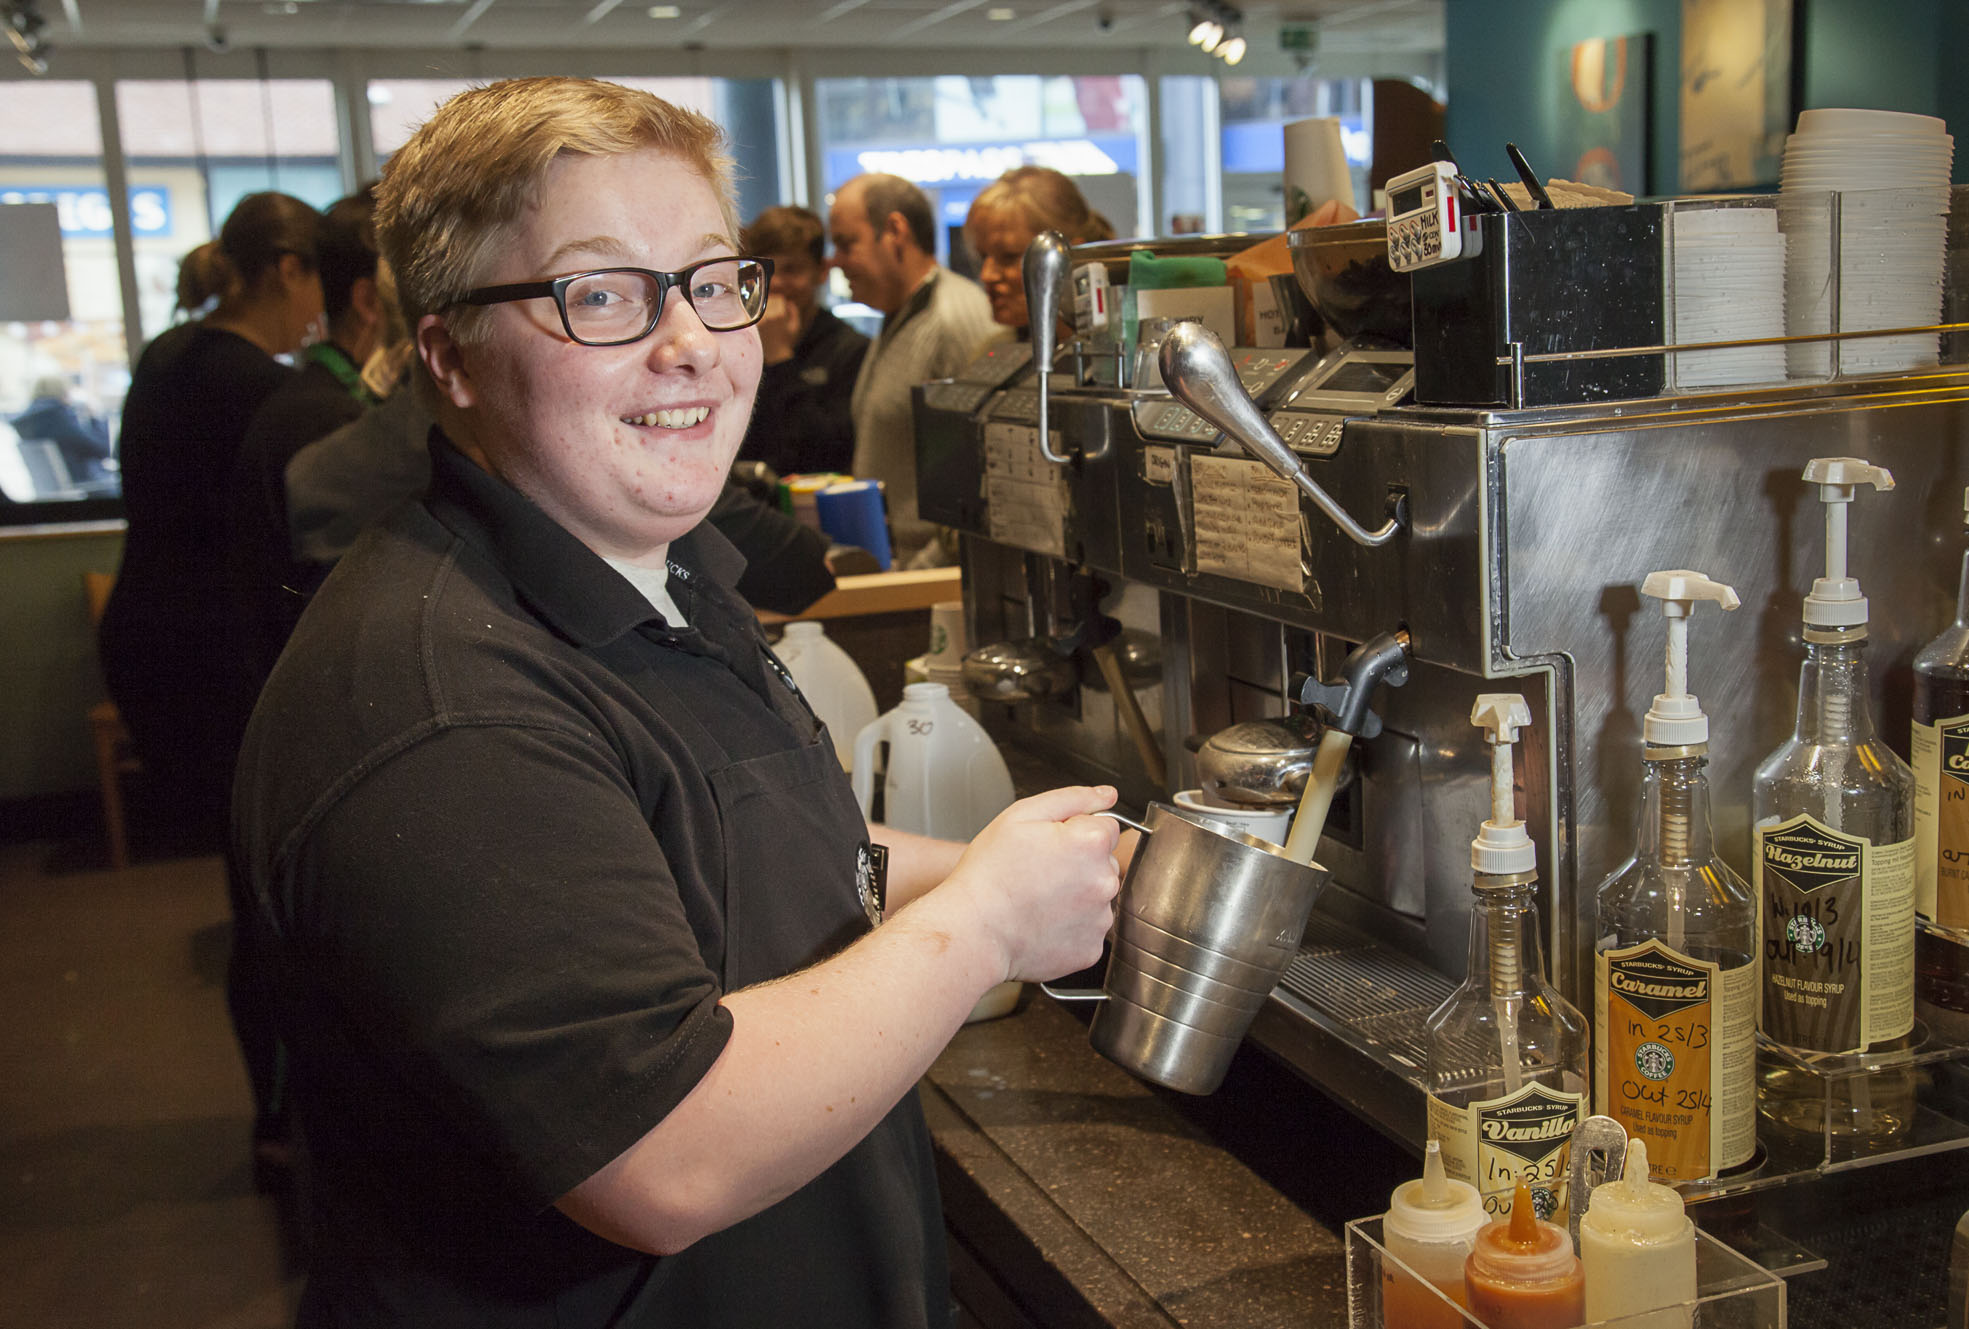 Young barista brews up success by qualifying as a Coffee Master